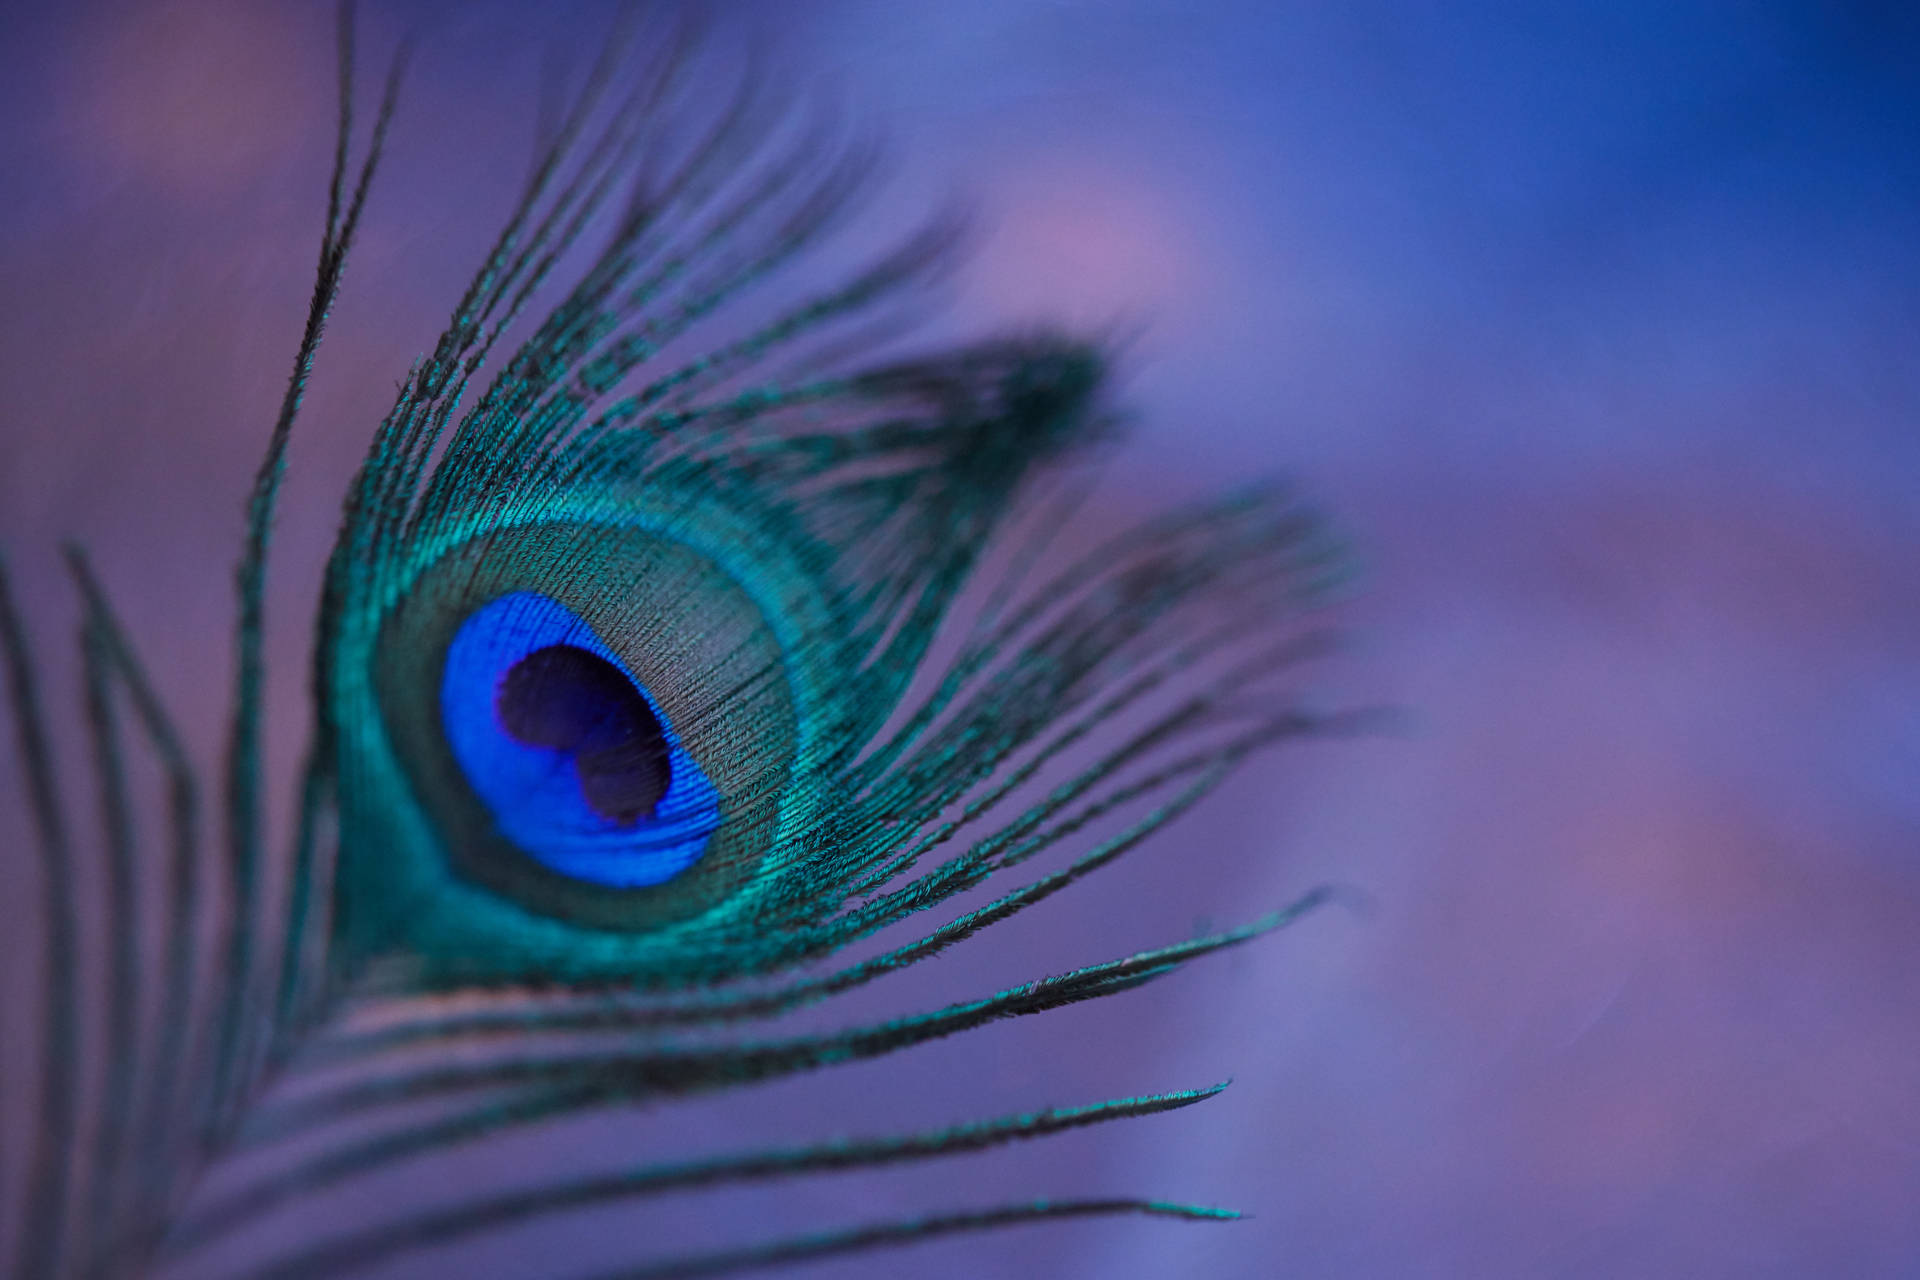 Focus Photography Of Peacock's Eye Spot Background